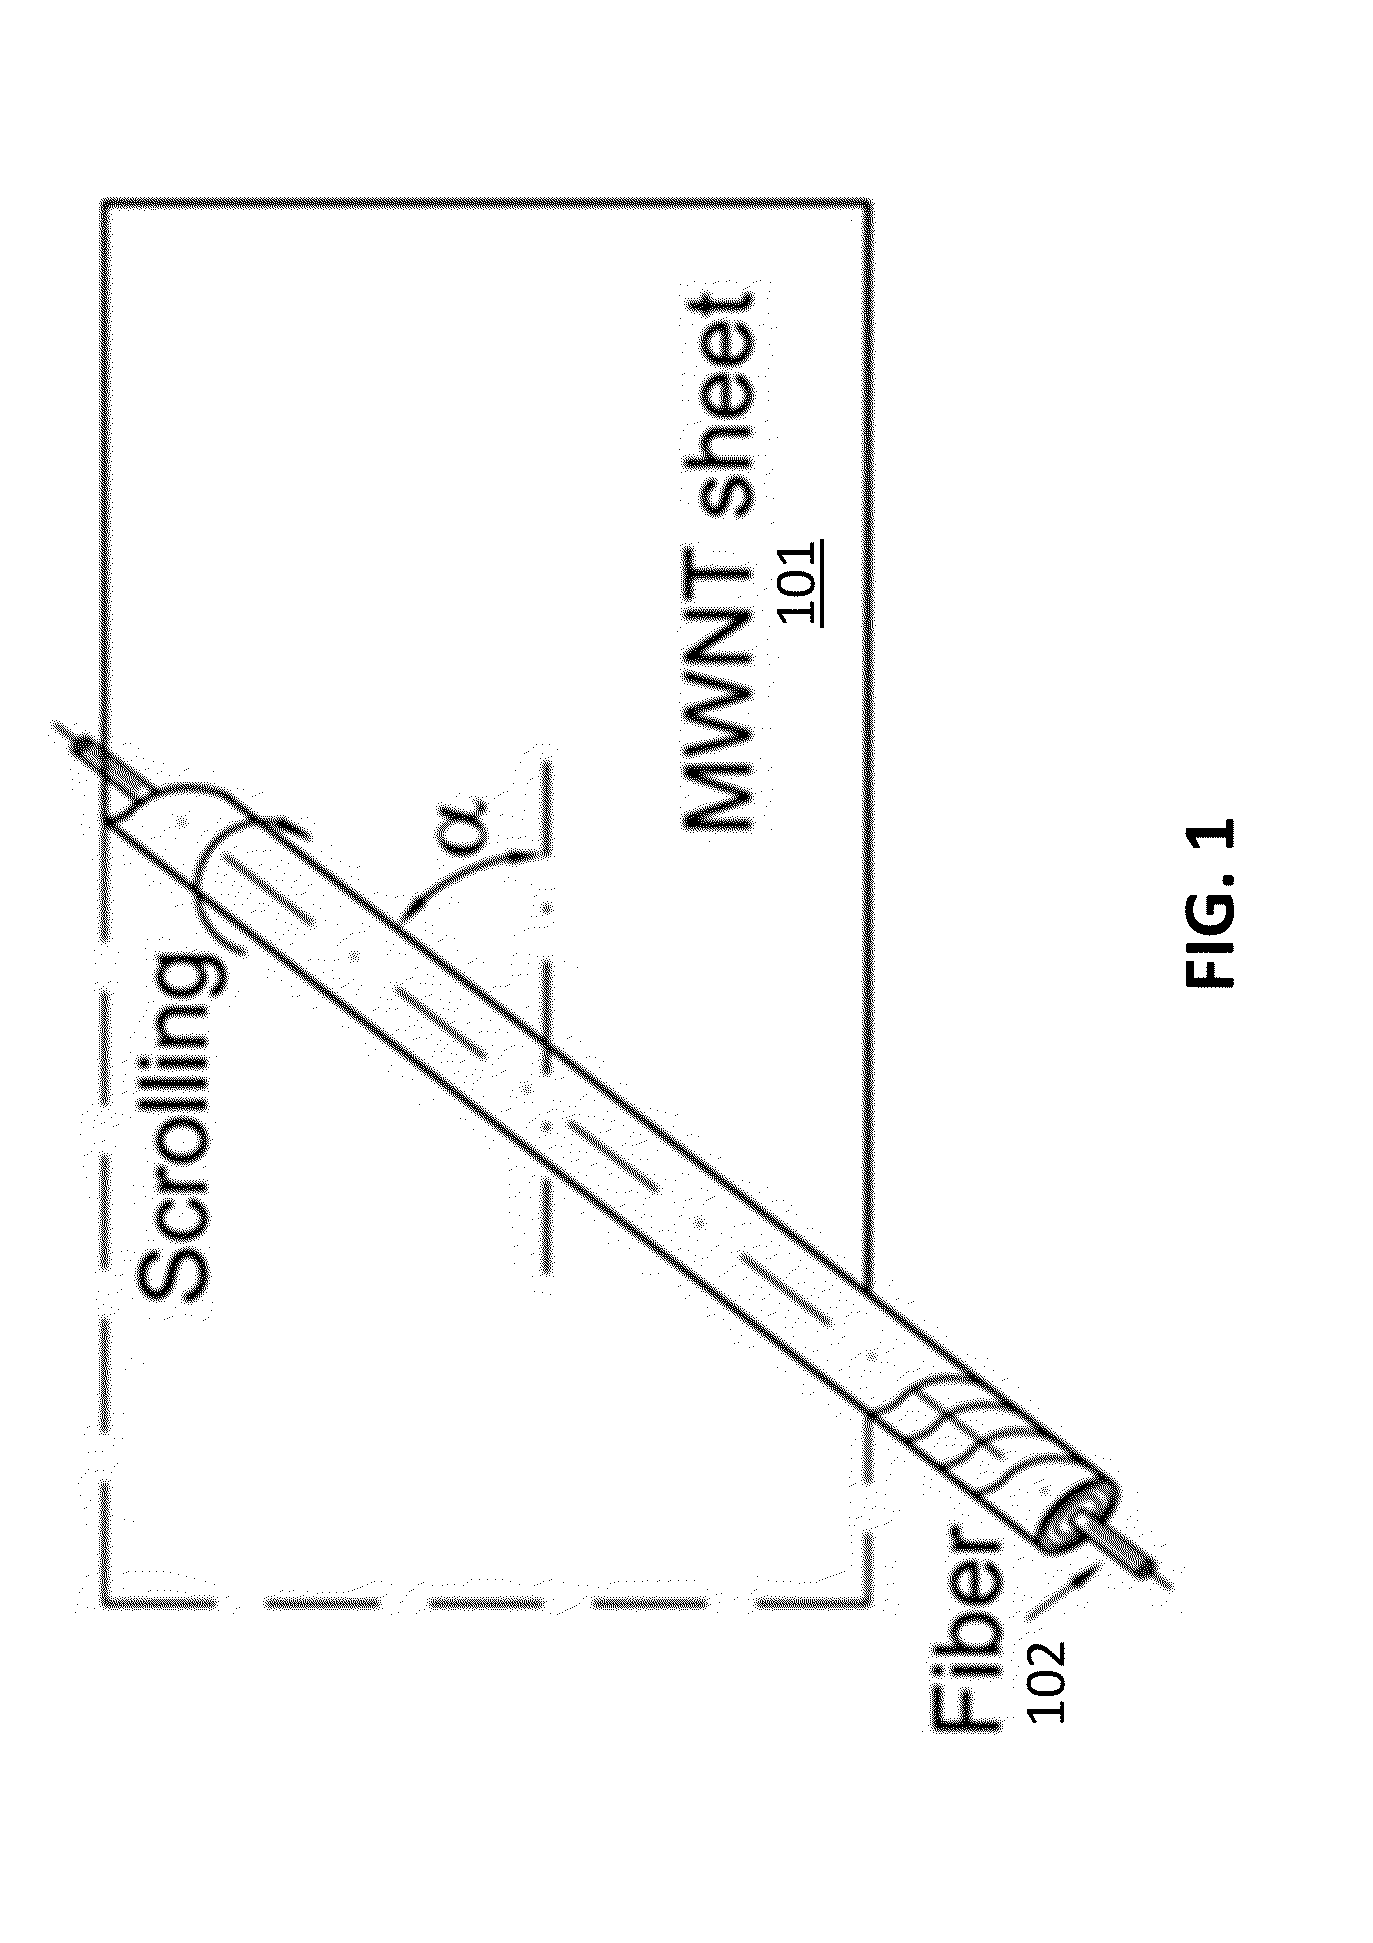 Method of fabricating carbon nanotube sheet scrolled fiber reinforced polymer composites and compositions and uses thereof